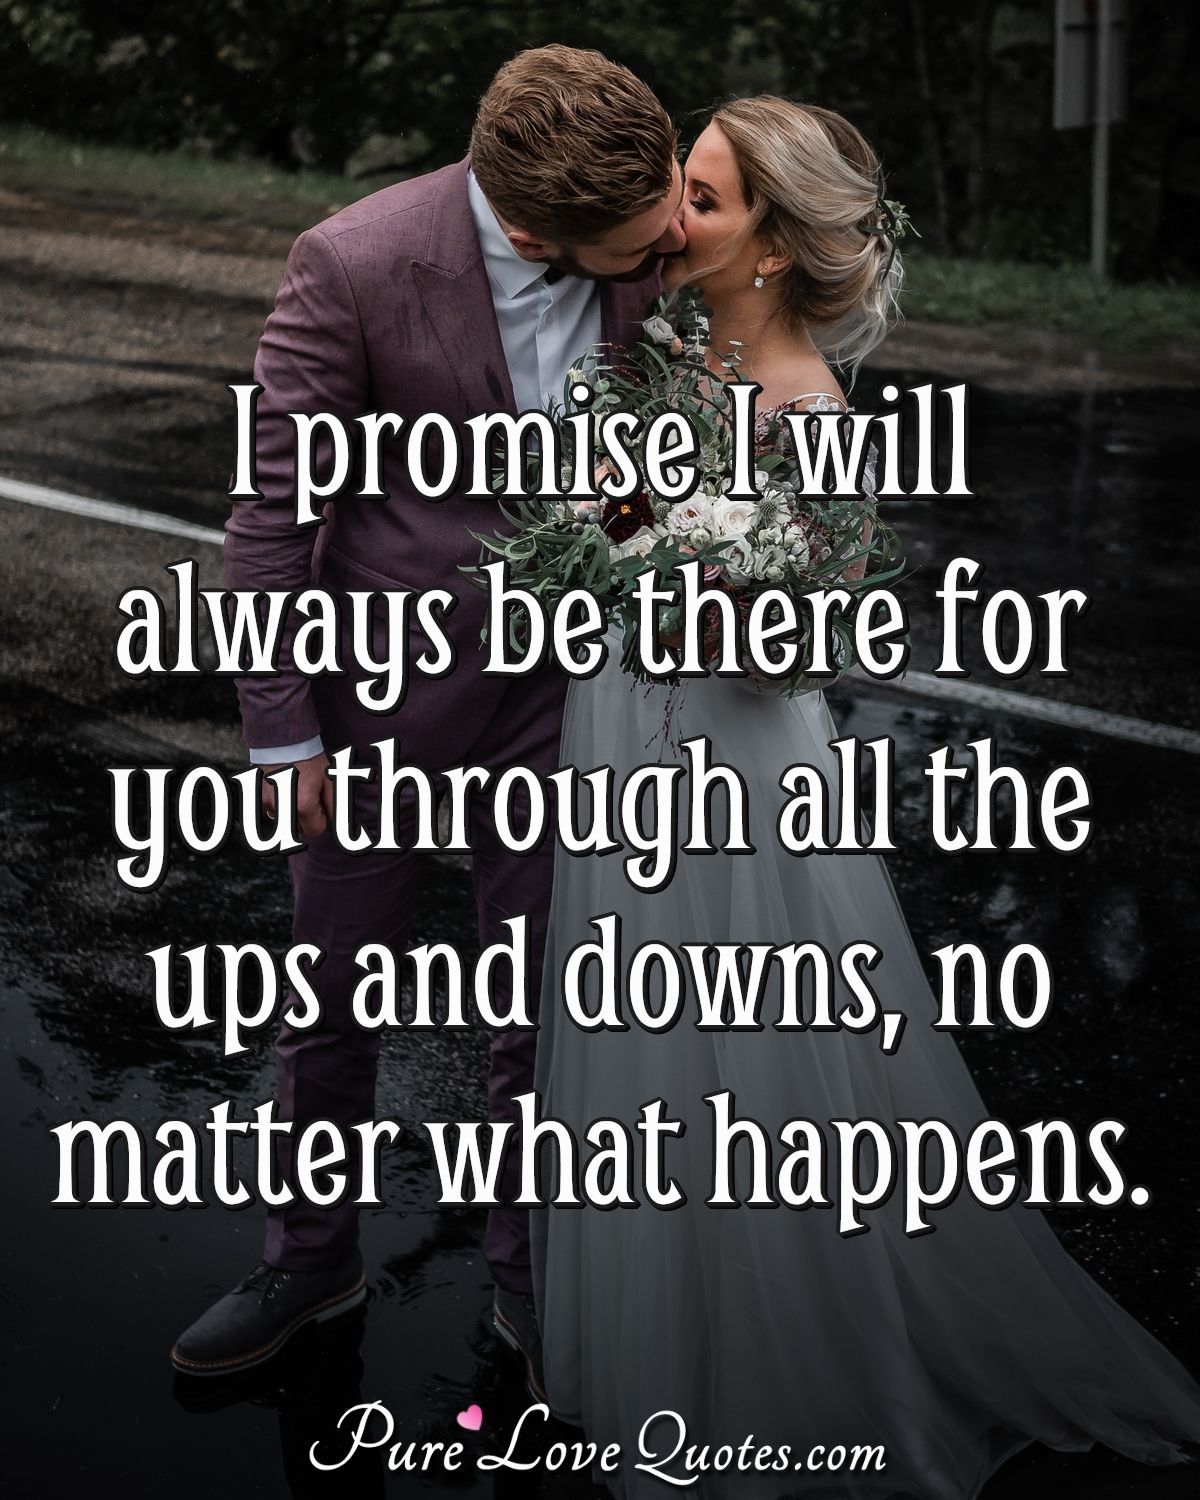 I promise I will always be there for you through all the ups and downs, no matter what happens. - Anonymous